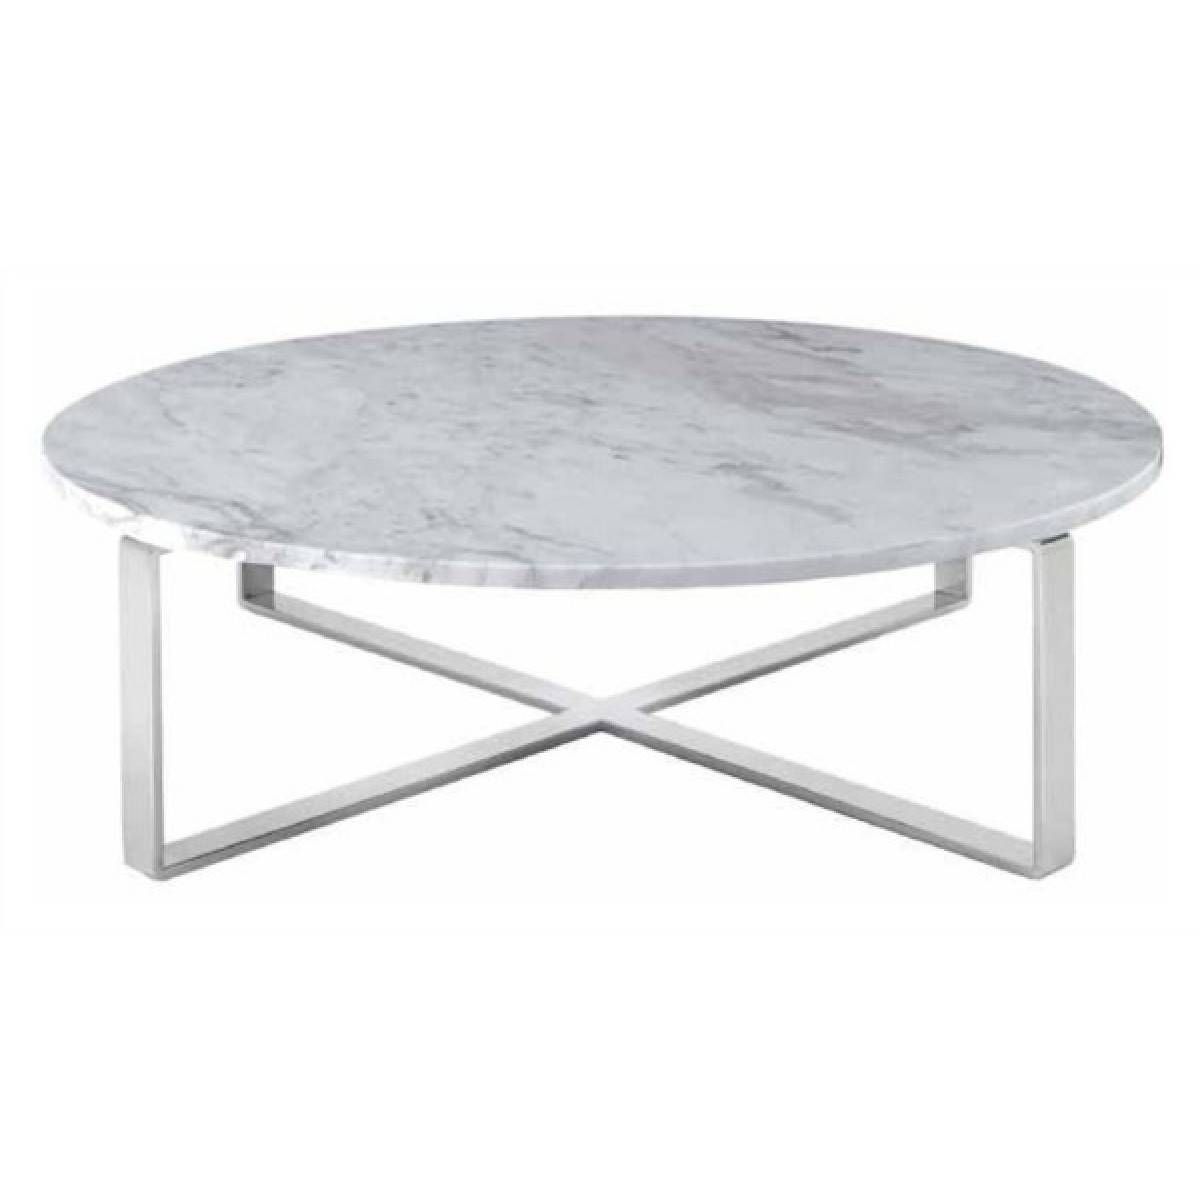 Gallery Of Luxurious White Marble Coffee Table – Green Marble For White Oval Coffee Tables (View 22 of 30)